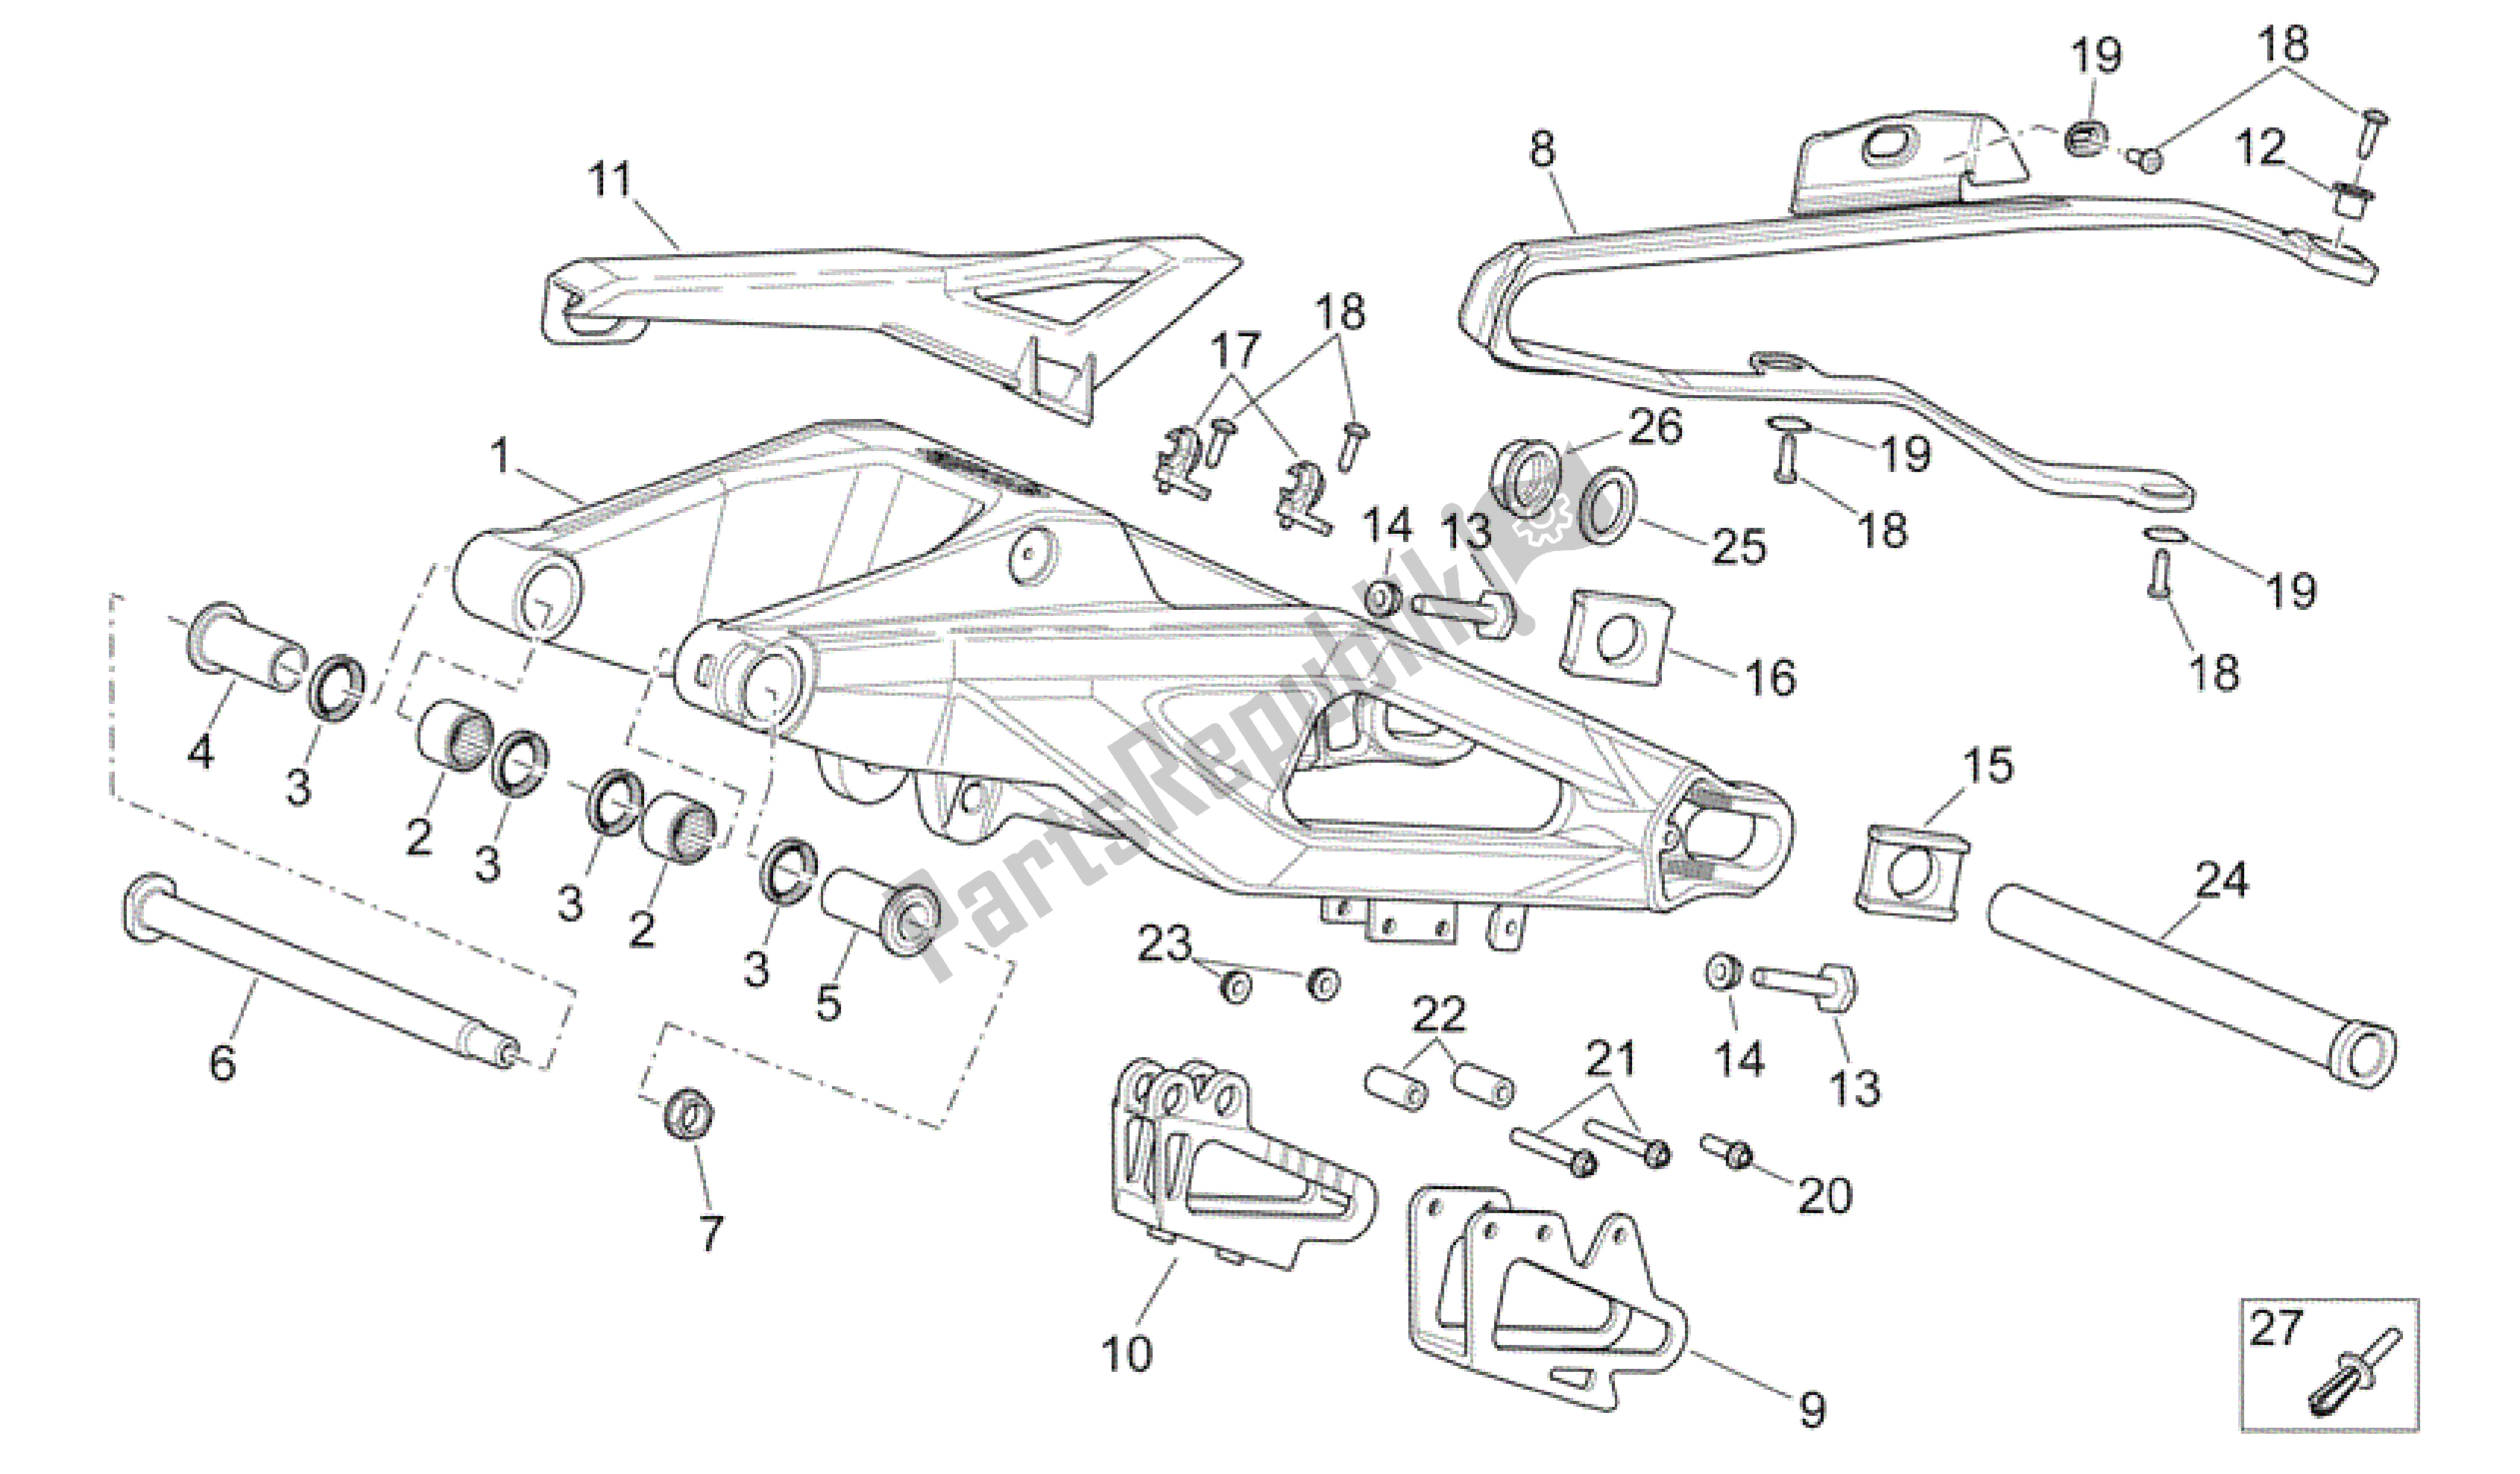 All parts for the Swing Arm of the Aprilia SXV 450 2009 - 2011